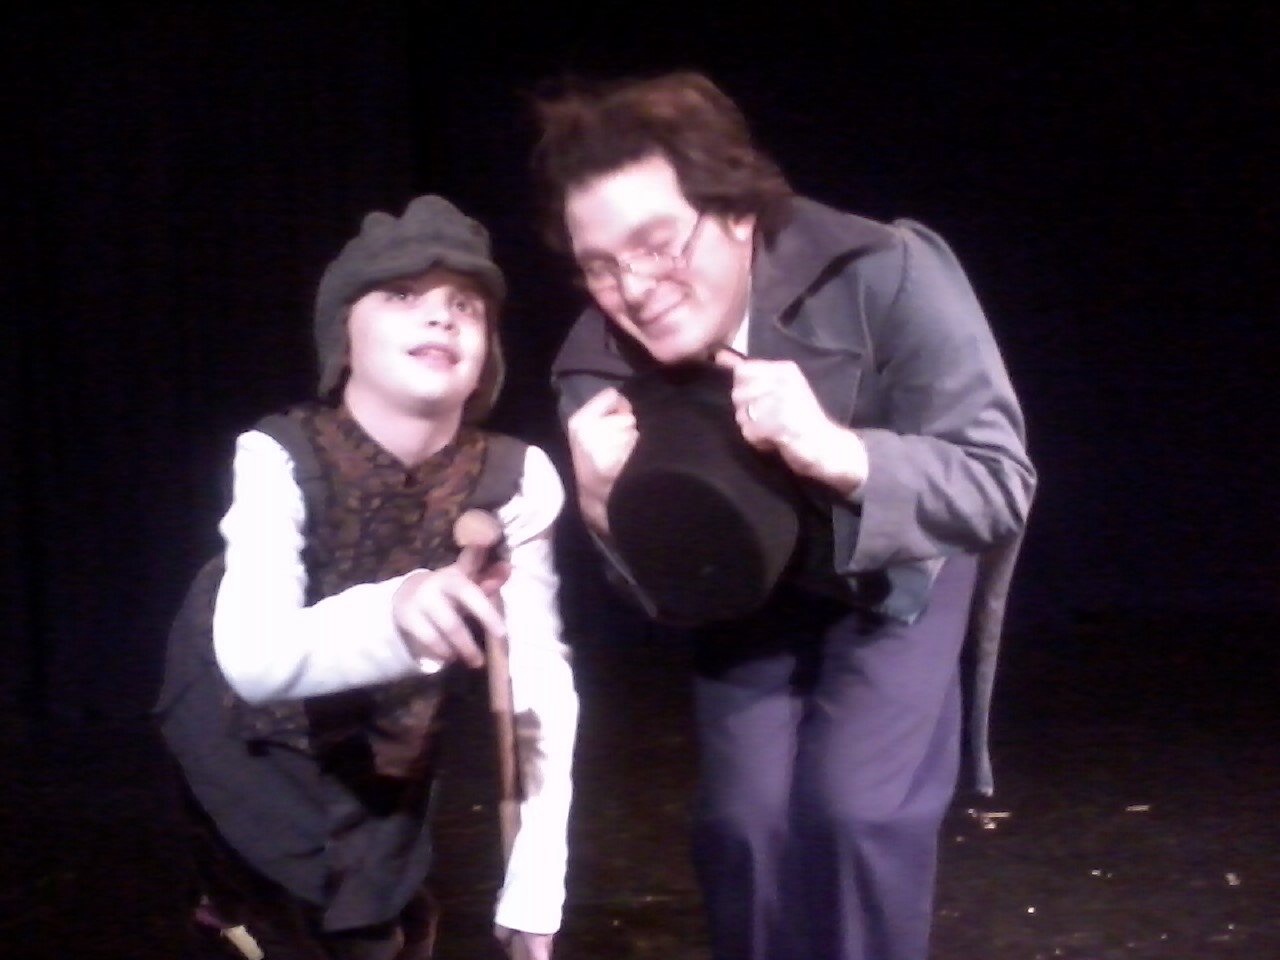 Danny Sauls (on right) as Bob Cratchit in an Off-Off broadway production of A Christmas Carol